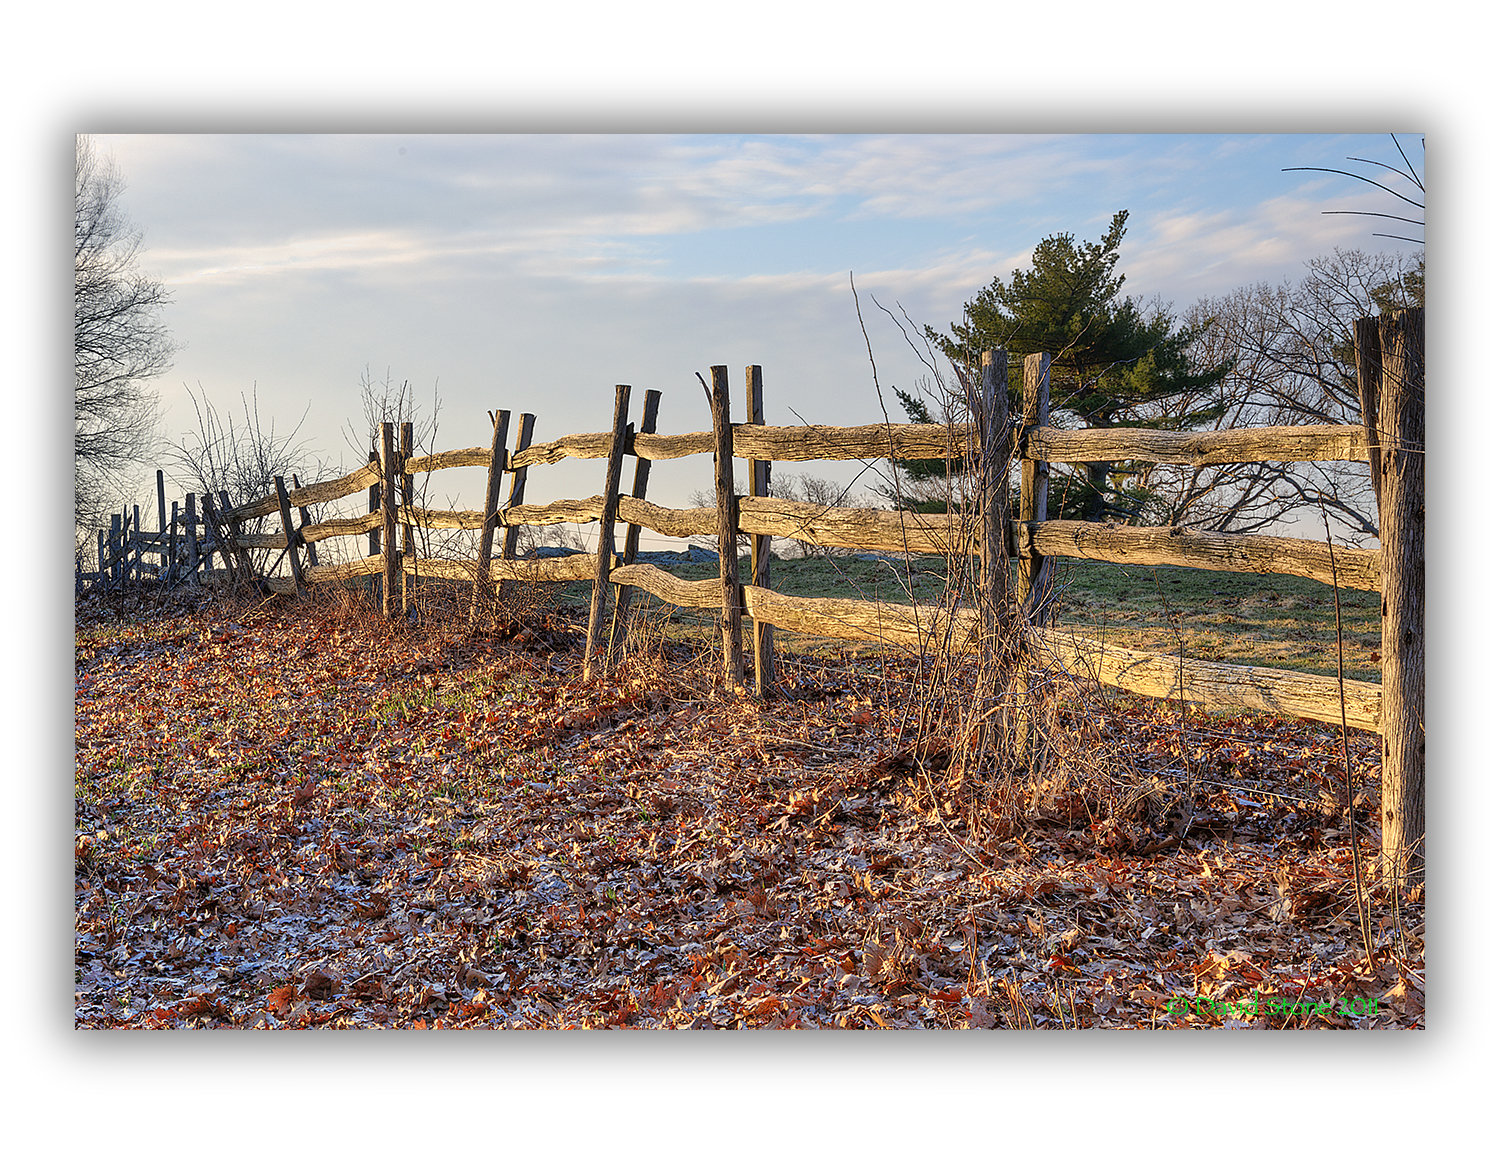 Split Rail Fence In Morning Light (user submitted)